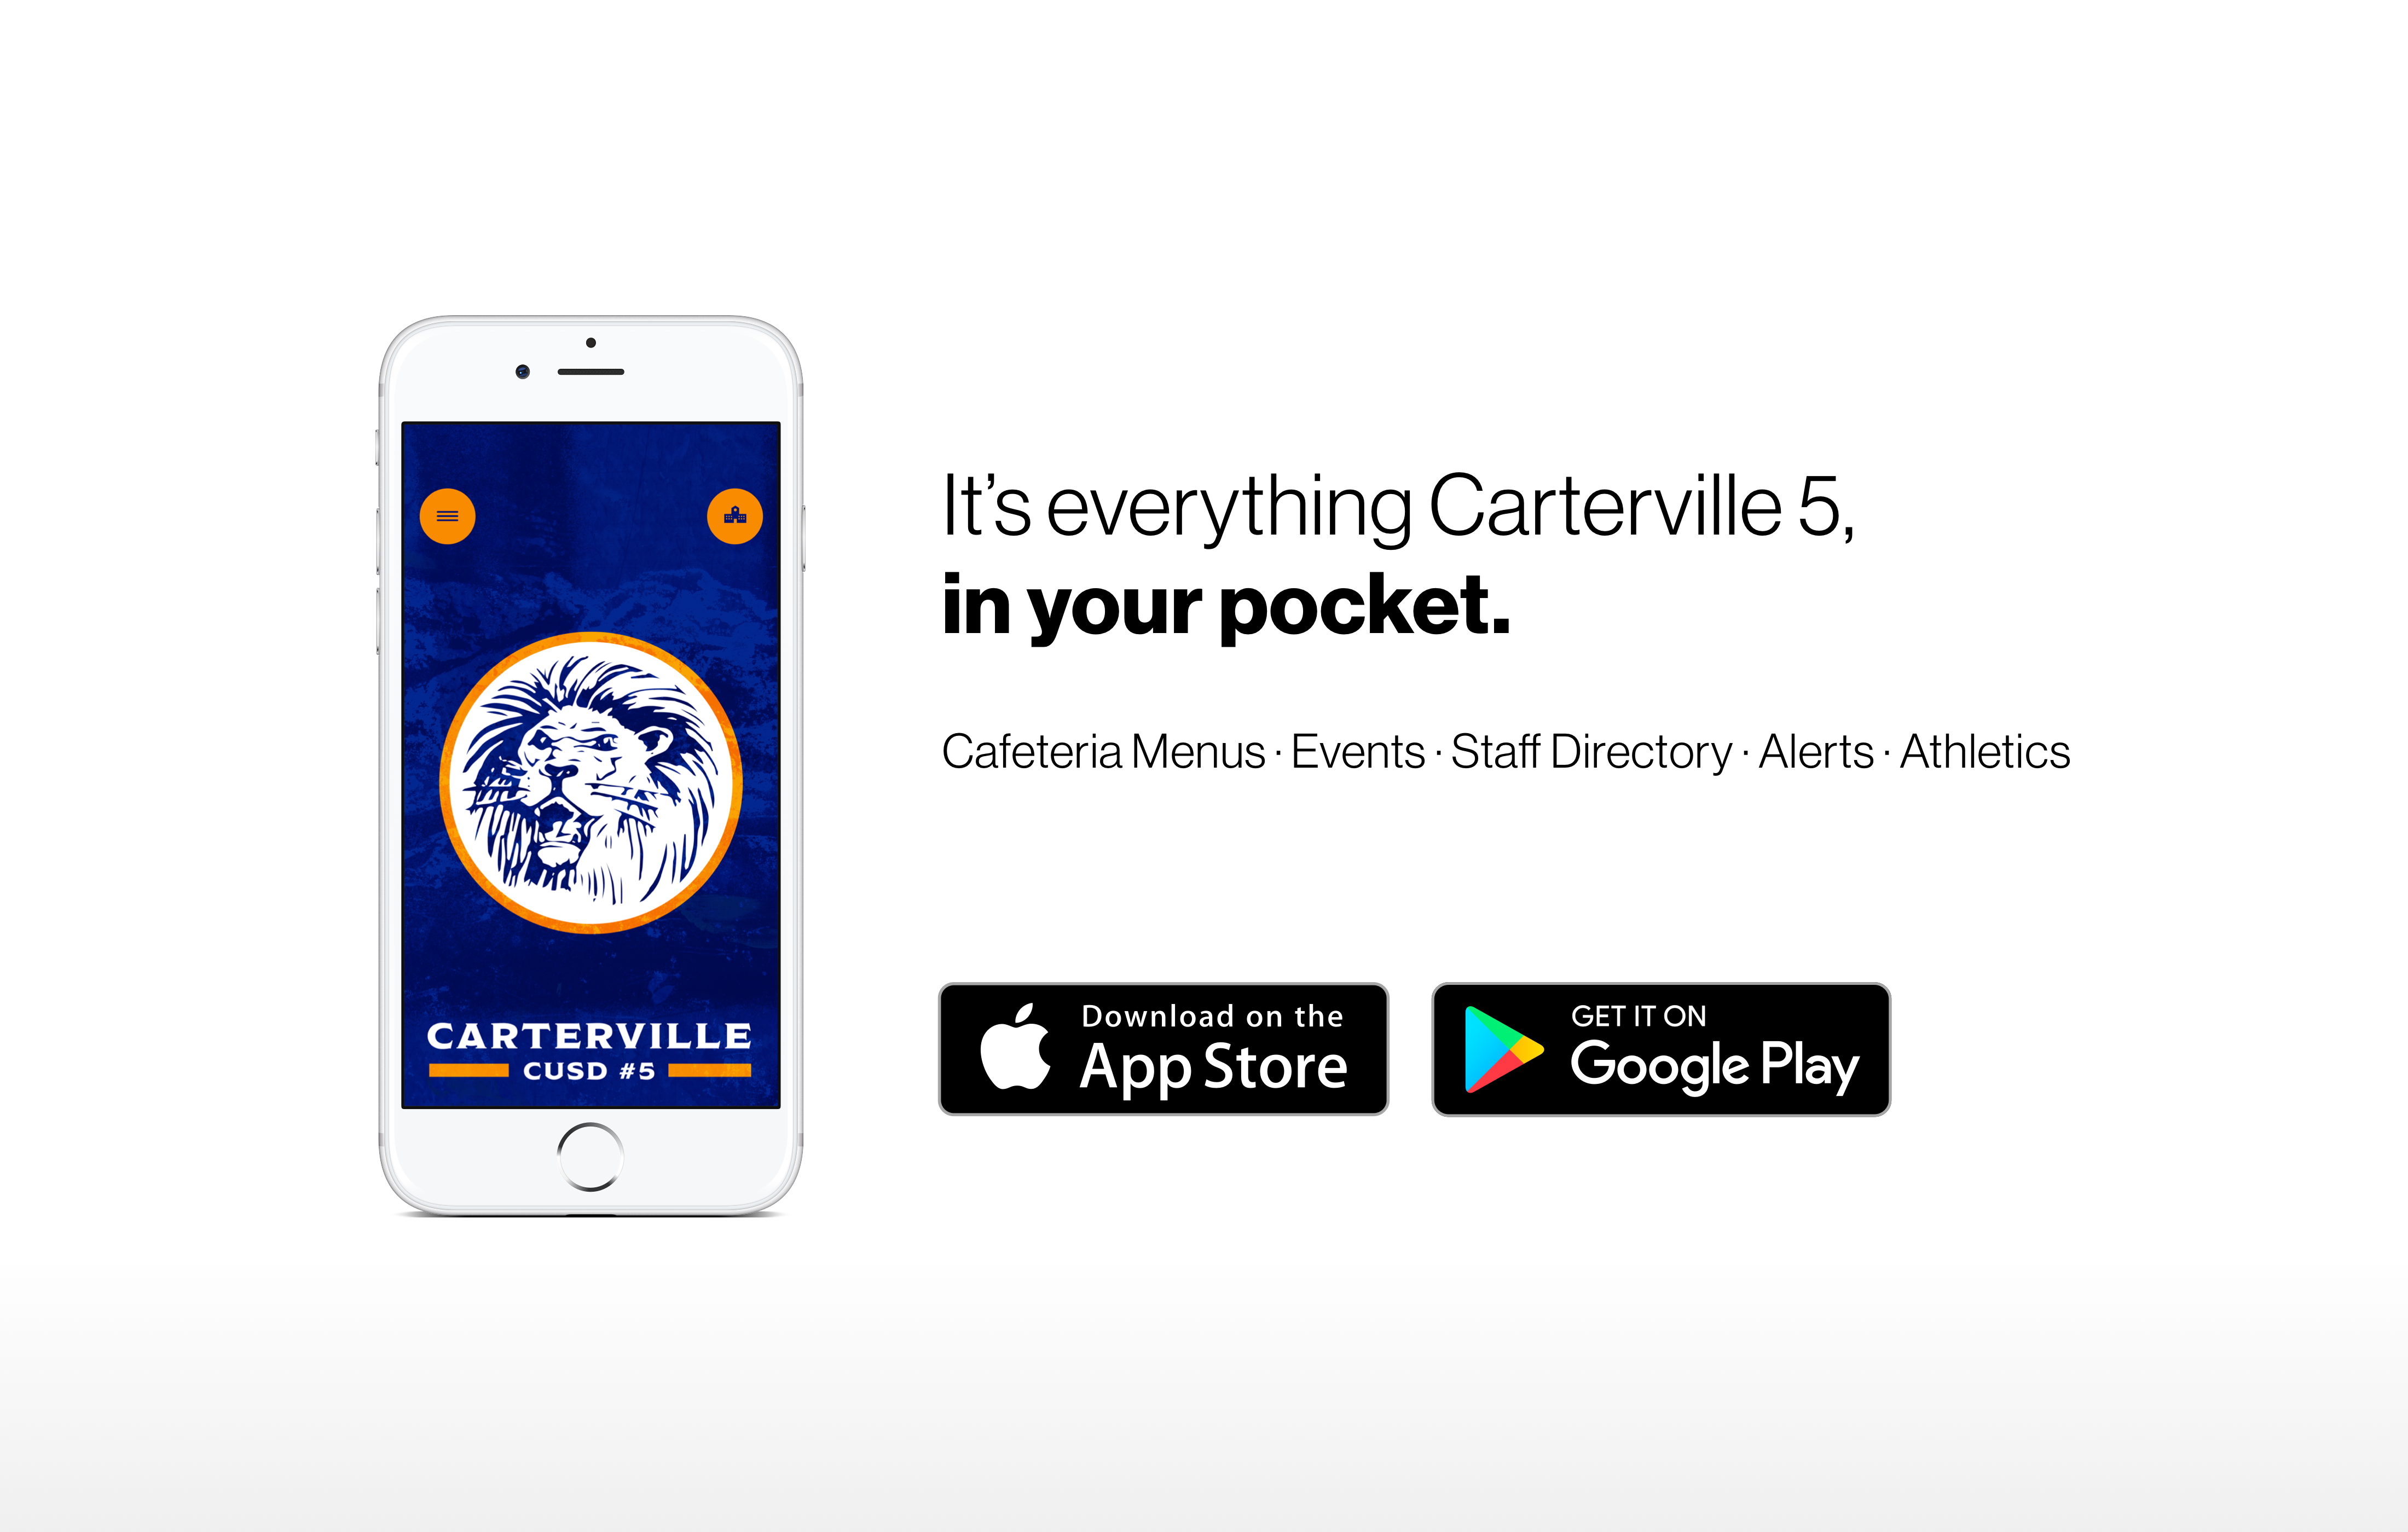 It's everything Carterville 5, in your pocket.